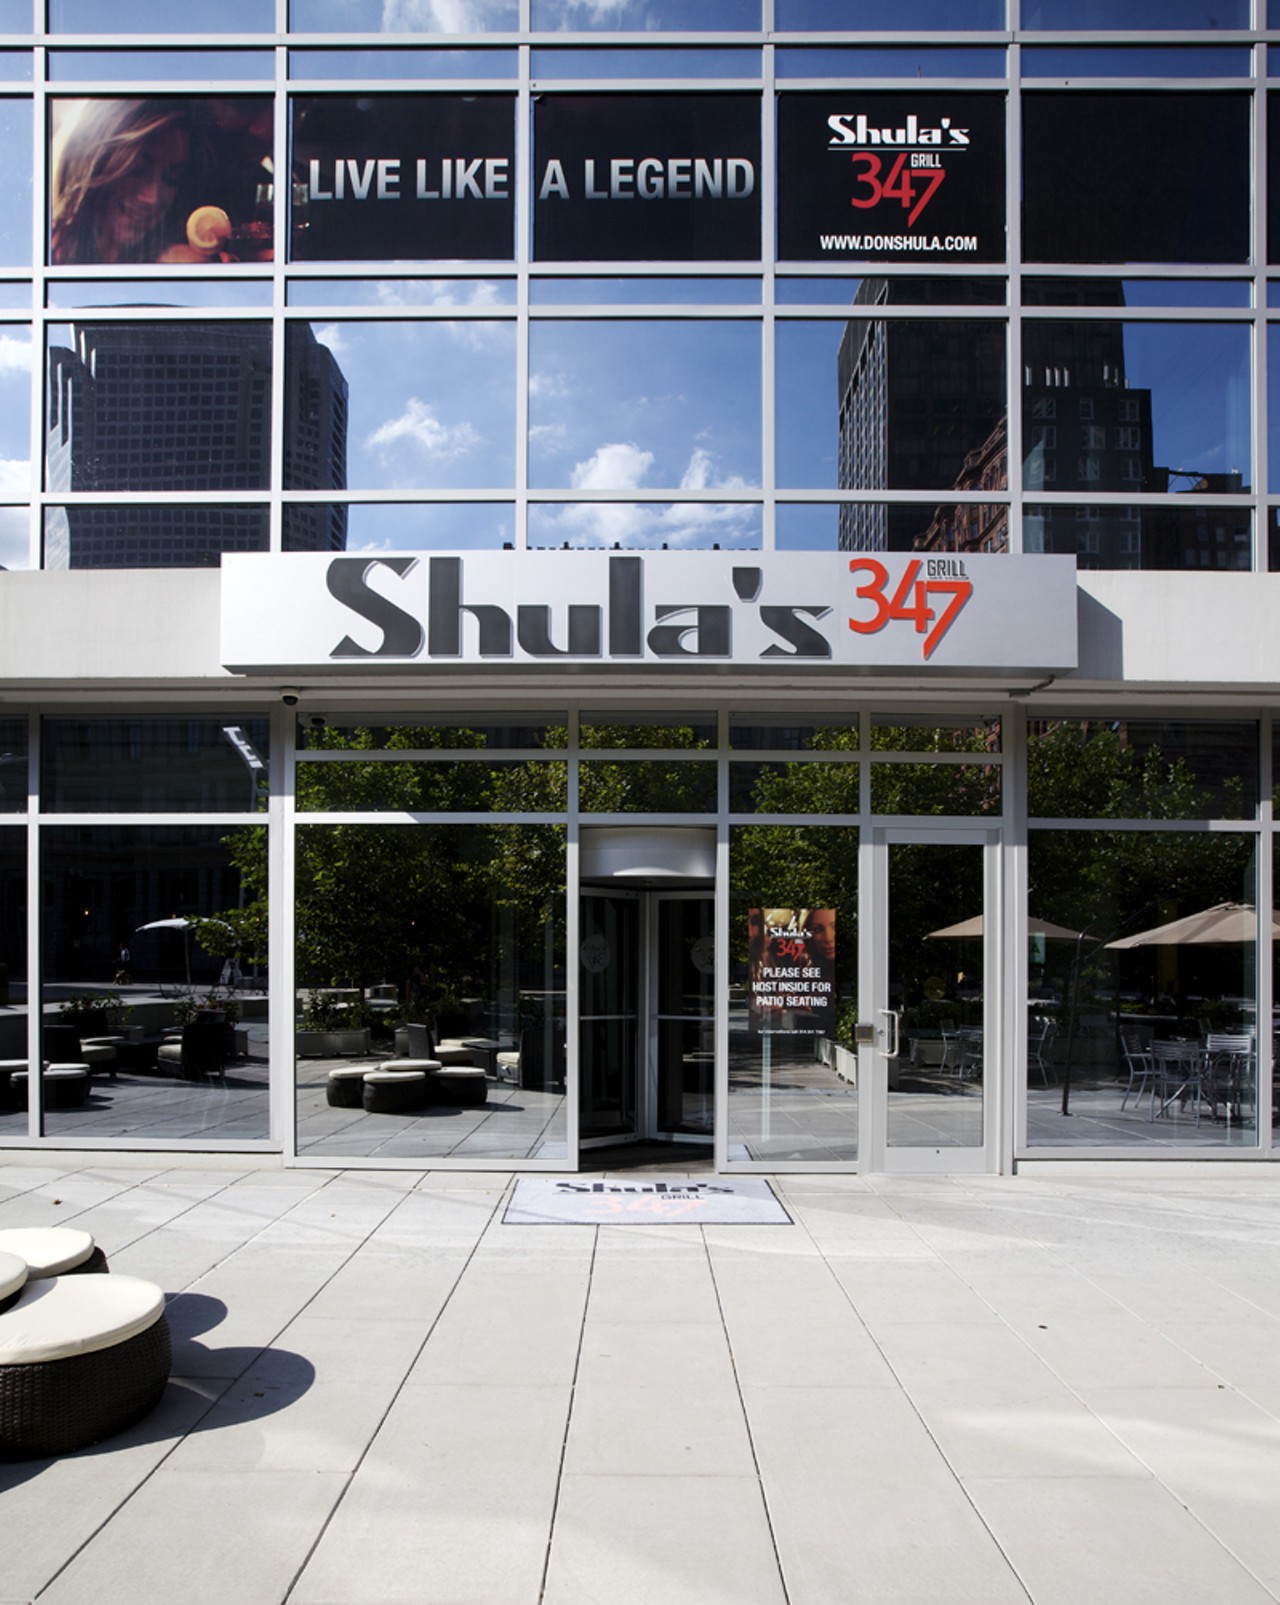 Shula's 347 as seen from the plaza entrance on the ground floor of Roberts Tower. The restaurant opened it's doors May1st of this year.